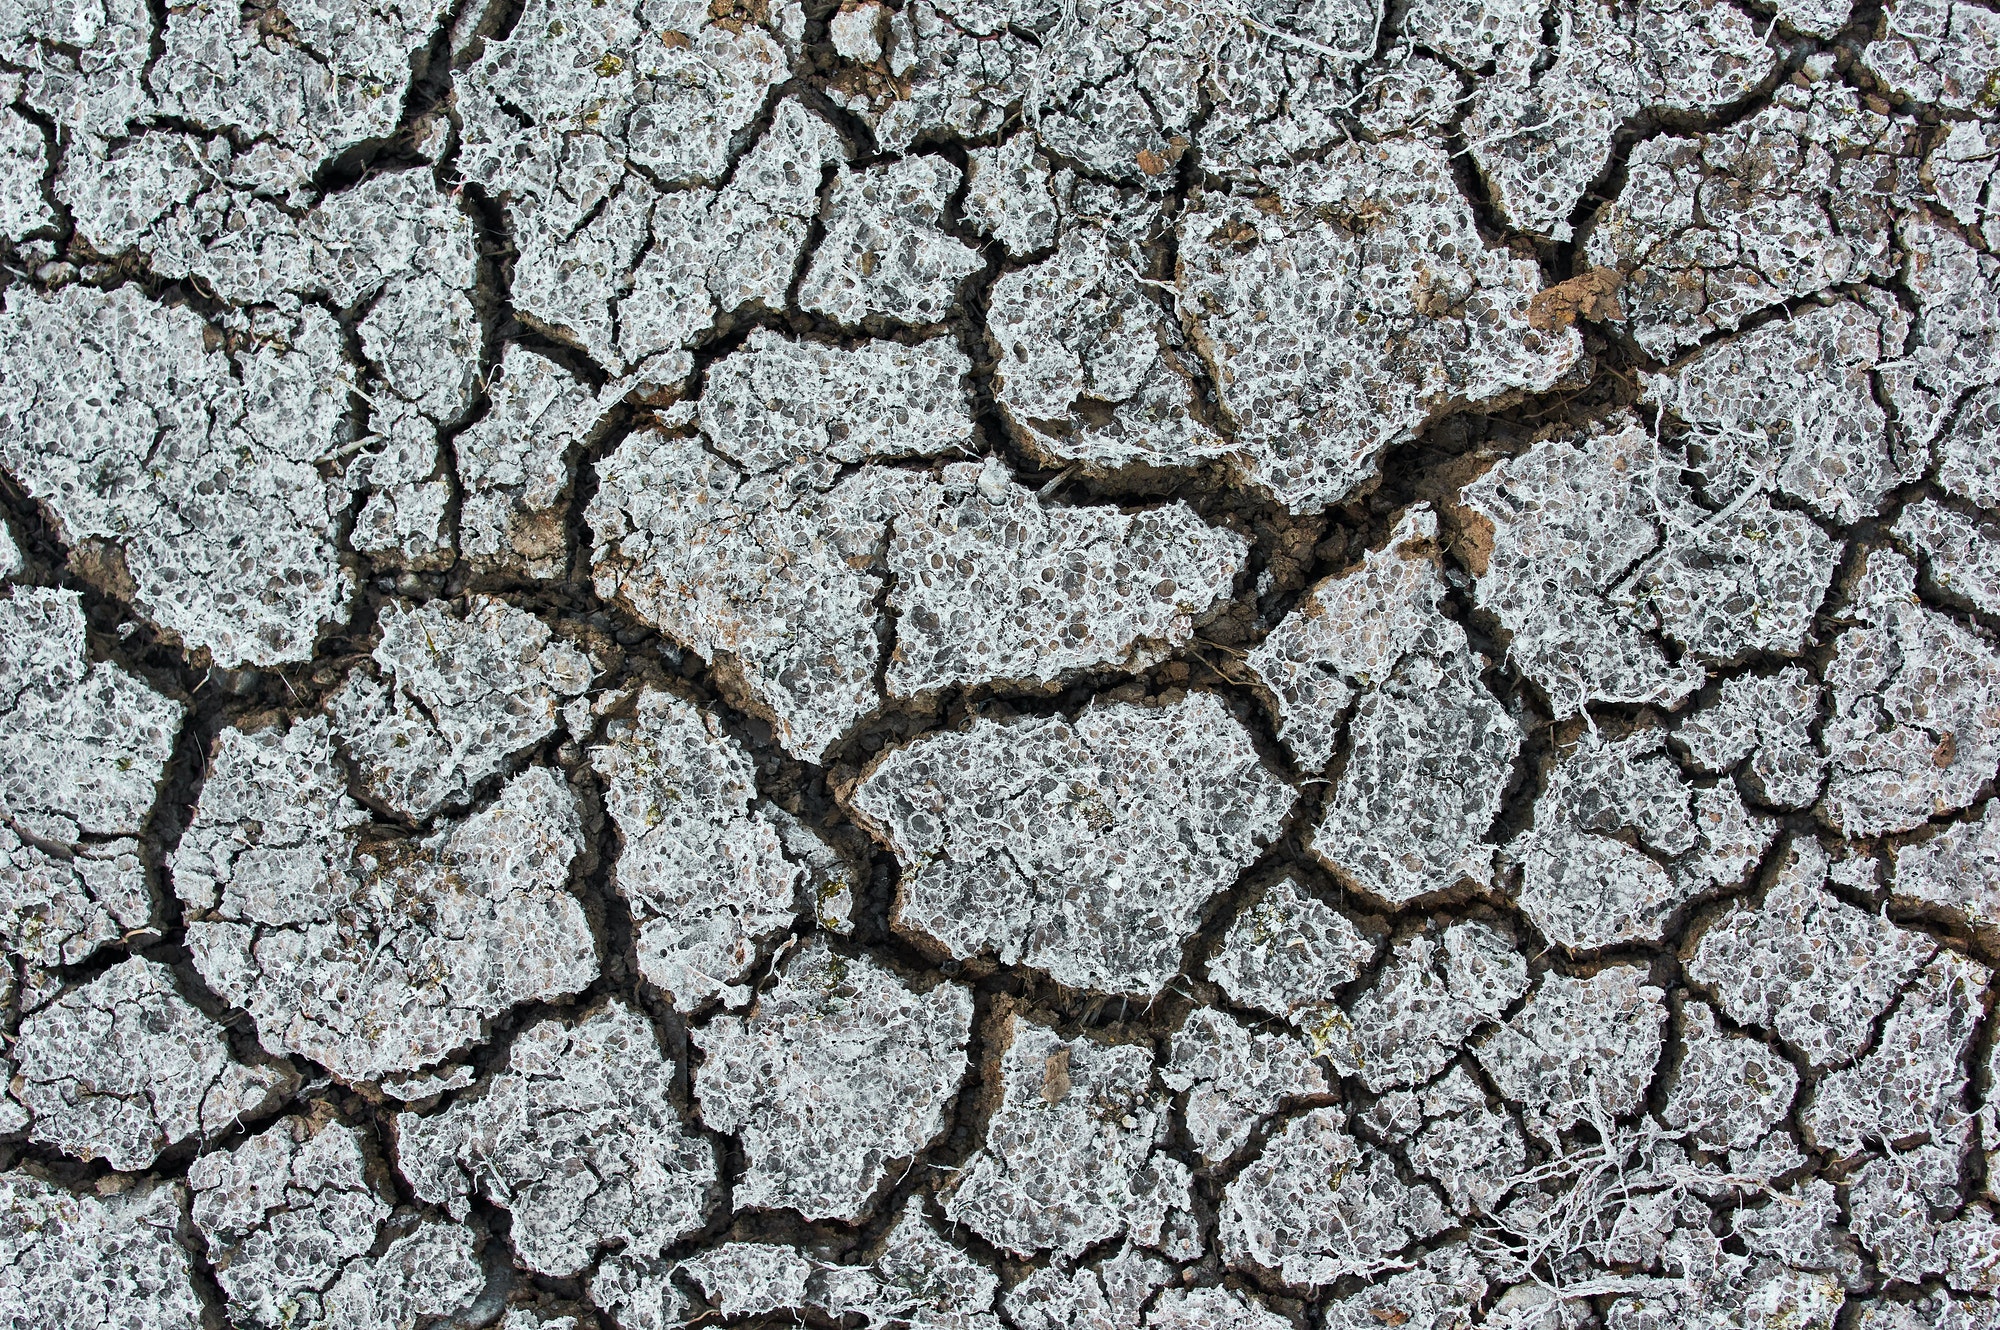 The arid climate and dry mud